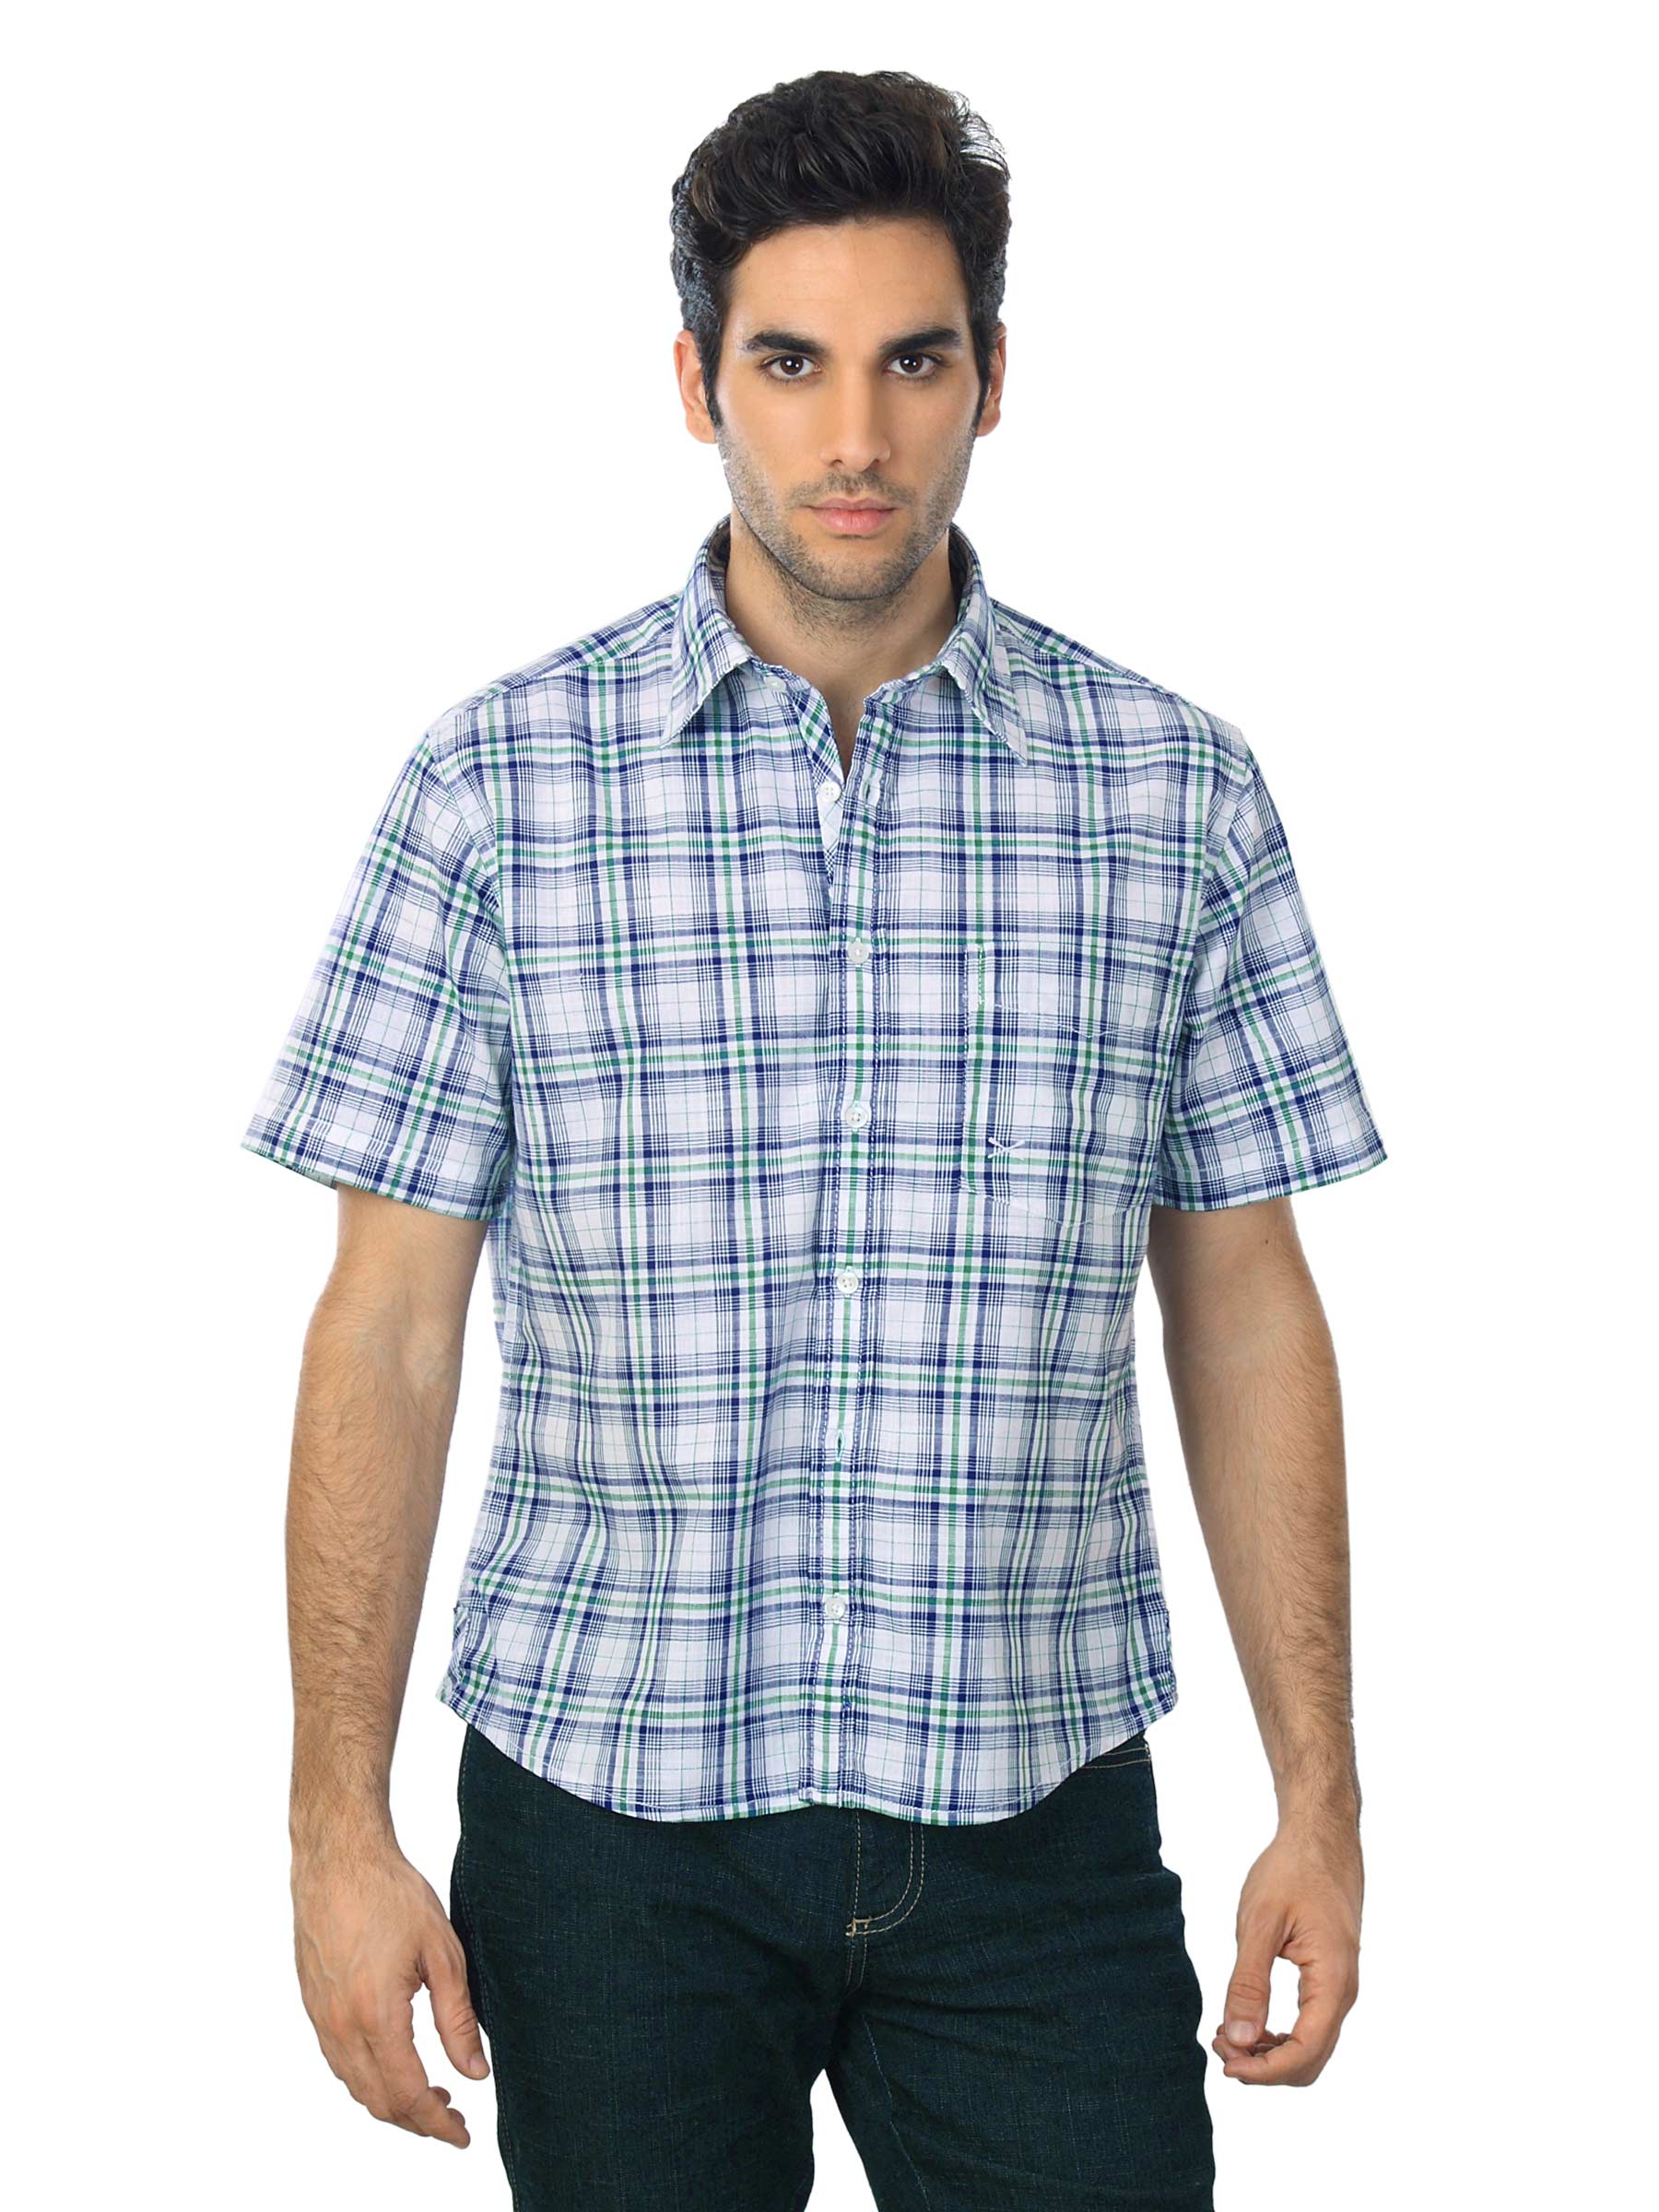 Scullers Men White & Navy Blue Check Shirt